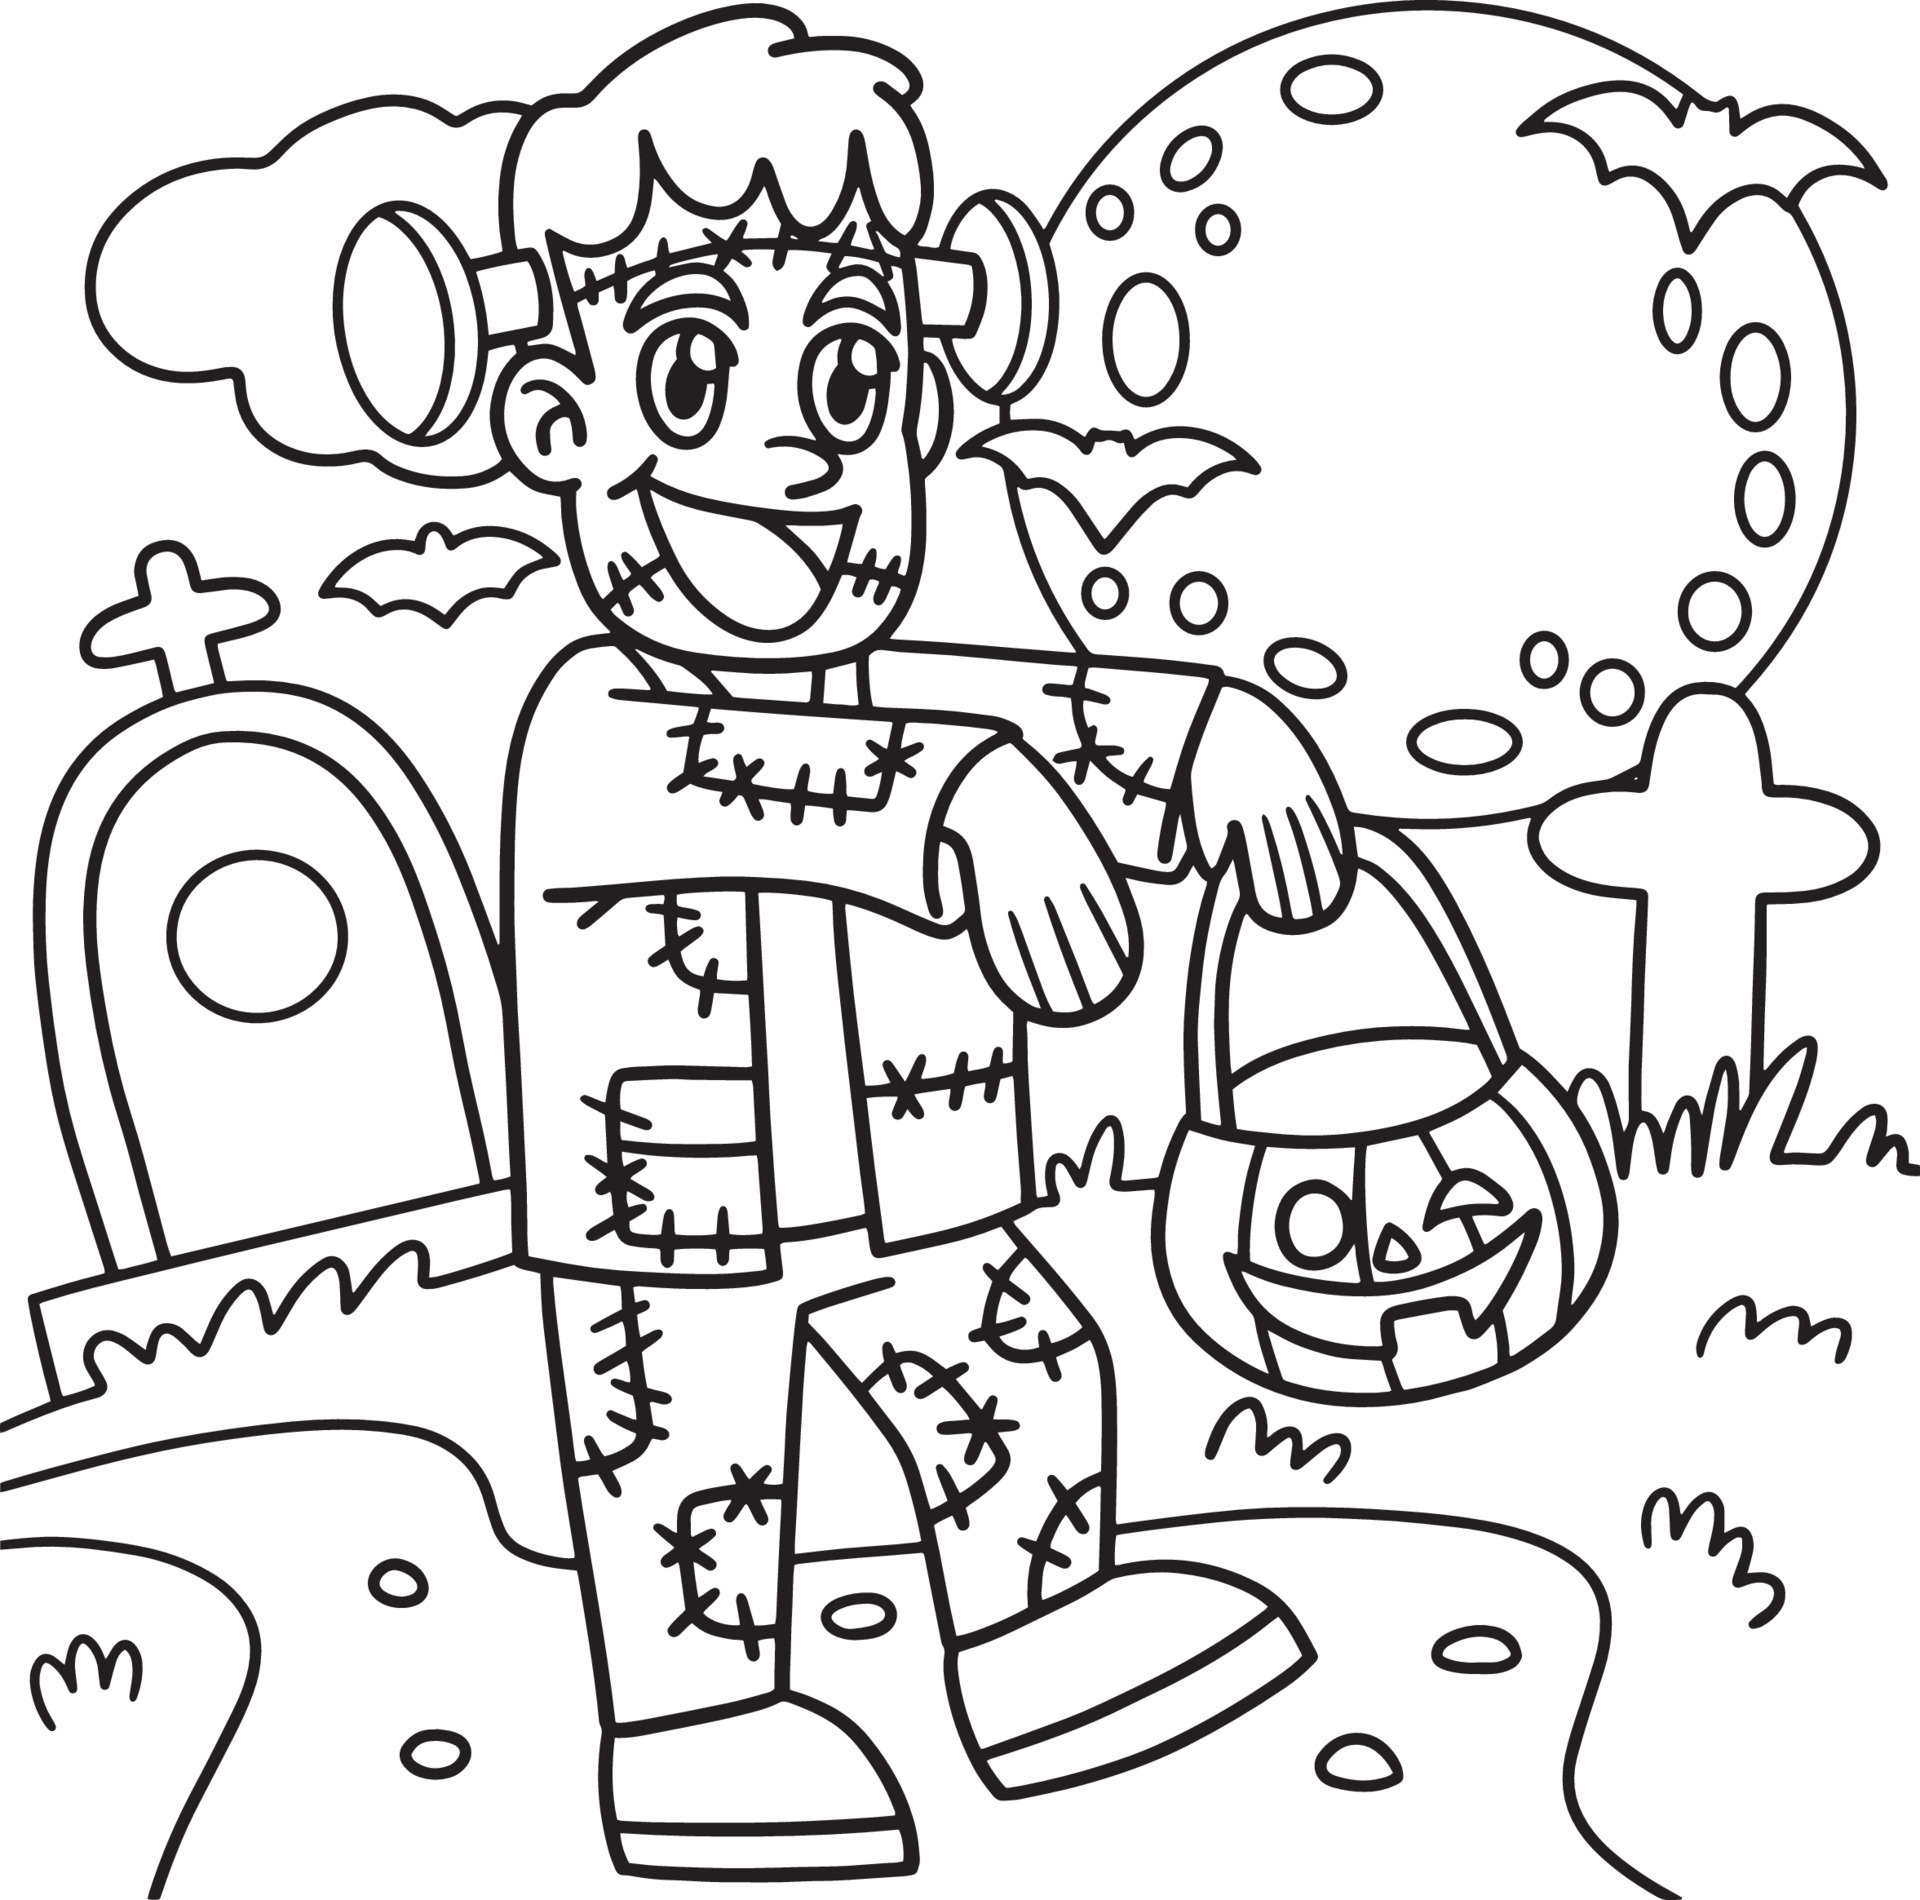 Page 2  Halloween coloring pages kids Vectors & Illustrations for